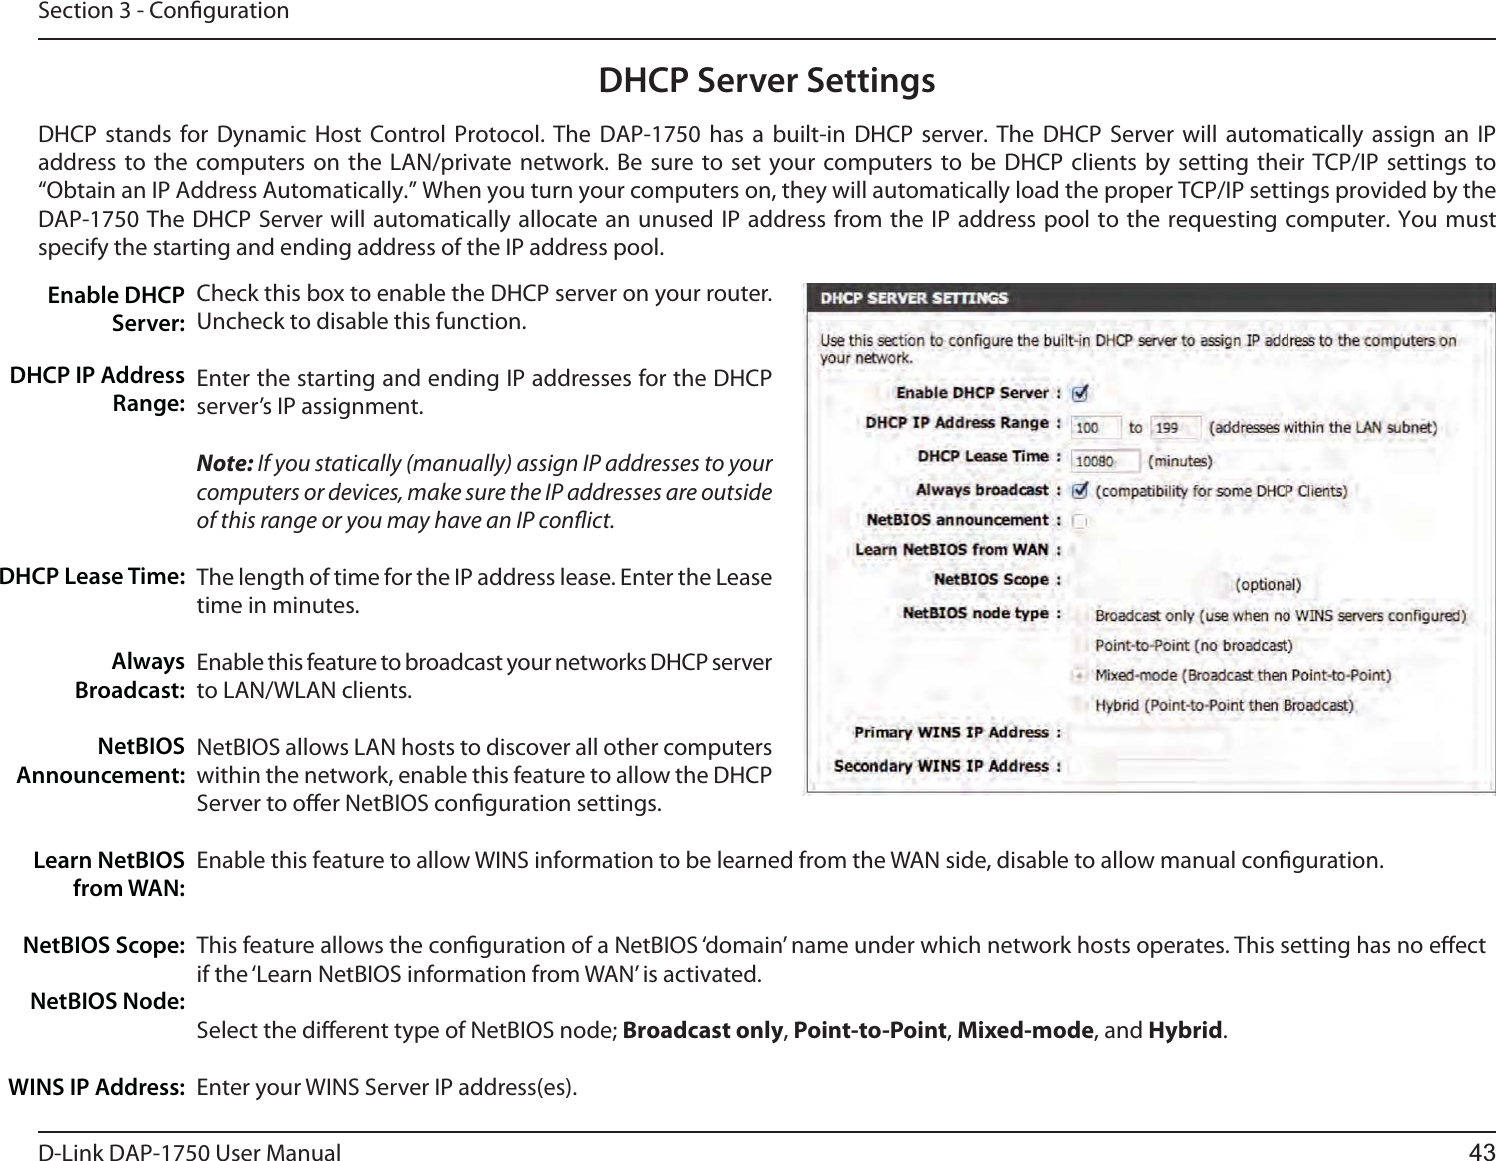 D-Link %&quot;1 User ManualSection 3 - CongurationDHCP Server SettingsDHCP stands for Dynamic Host Control Protocol. The %&quot;1 has a built-in DHCP server. The DHCP Server will automatically assign an IP address to the computers on the LAN/private network. Be sure to set your computers to be DHCP clients by setting their TCP/IP settings to “Obtain an IP Address Automatically.” When you turn your computers on, they will automatically load the proper TCP/IP settings provided by the %&quot;1 The DHCP Server will automatically allocate an unused IP address from the IP address pool to the requesting computer. You must specify the starting and ending address of the IP address pool.Check this box to enable the DHCP server on your router. Uncheck to disable this function.Enter the starting and ending IP addresses for the DHCP server’s IP assignment.Note: If you statically (manually) assign IP addresses to your computers or devices, make sure the IP addresses are outside of this range or you may have an IP conict. The length of time for the IP address lease. Enter the Lease time in minutes.Enable this feature to broadcast your networks DHCP server to LAN/WLAN clients.NetBIOS allows LAN hosts to discover all other computers within the network, enable this feature to allow the DHCP Server to oer NetBIOS conguration settings.Enable this feature to allow WINS information to be learned from the WAN side, disable to allow manual conguration.This feature allows the conguration of a NetBIOS ‘domain’ name under which network hosts operates. This setting has no eect if the ‘Learn NetBIOS information from WAN’ is activated.Select the dierent type of NetBIOS node; Broadcast only, Point-to-Point, Mixed-mode, and Hybrid.Enter your WINS Server IP address(es).Enable DHCP Server:DHCP IP Address Range:DHCP Lease Time:Always Broadcast:NetBIOS Announcement:Learn NetBIOS from WAN:NetBIOS Scope:NetBIOS Node:WINS IP Address:43